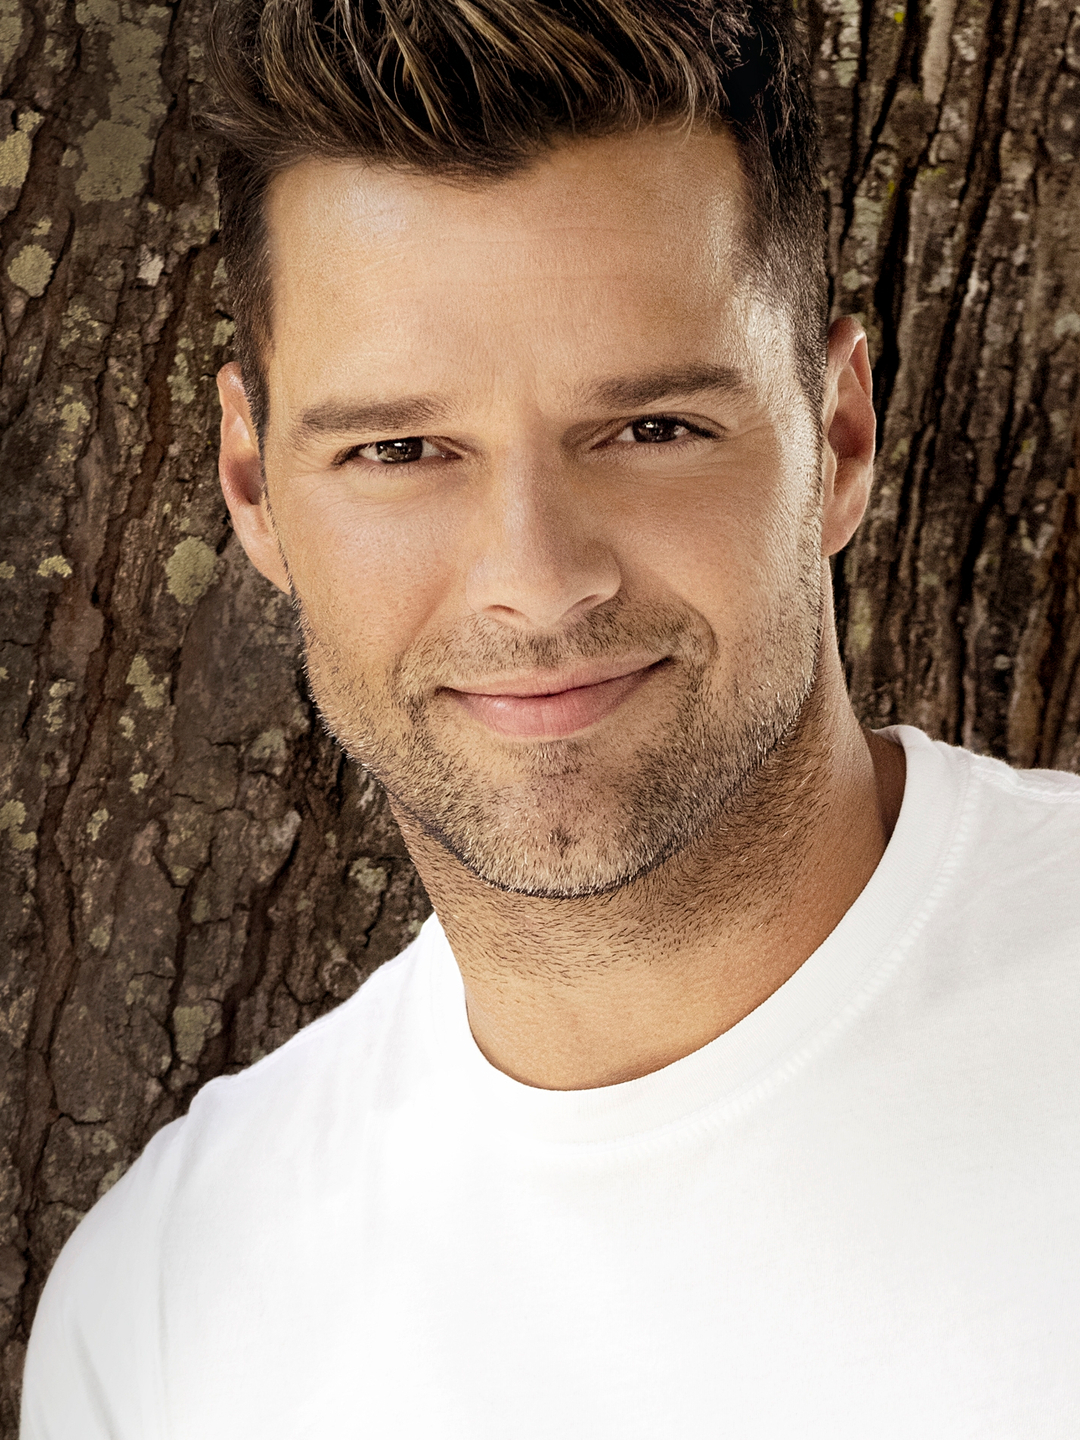 Ricky Martin who are his parents